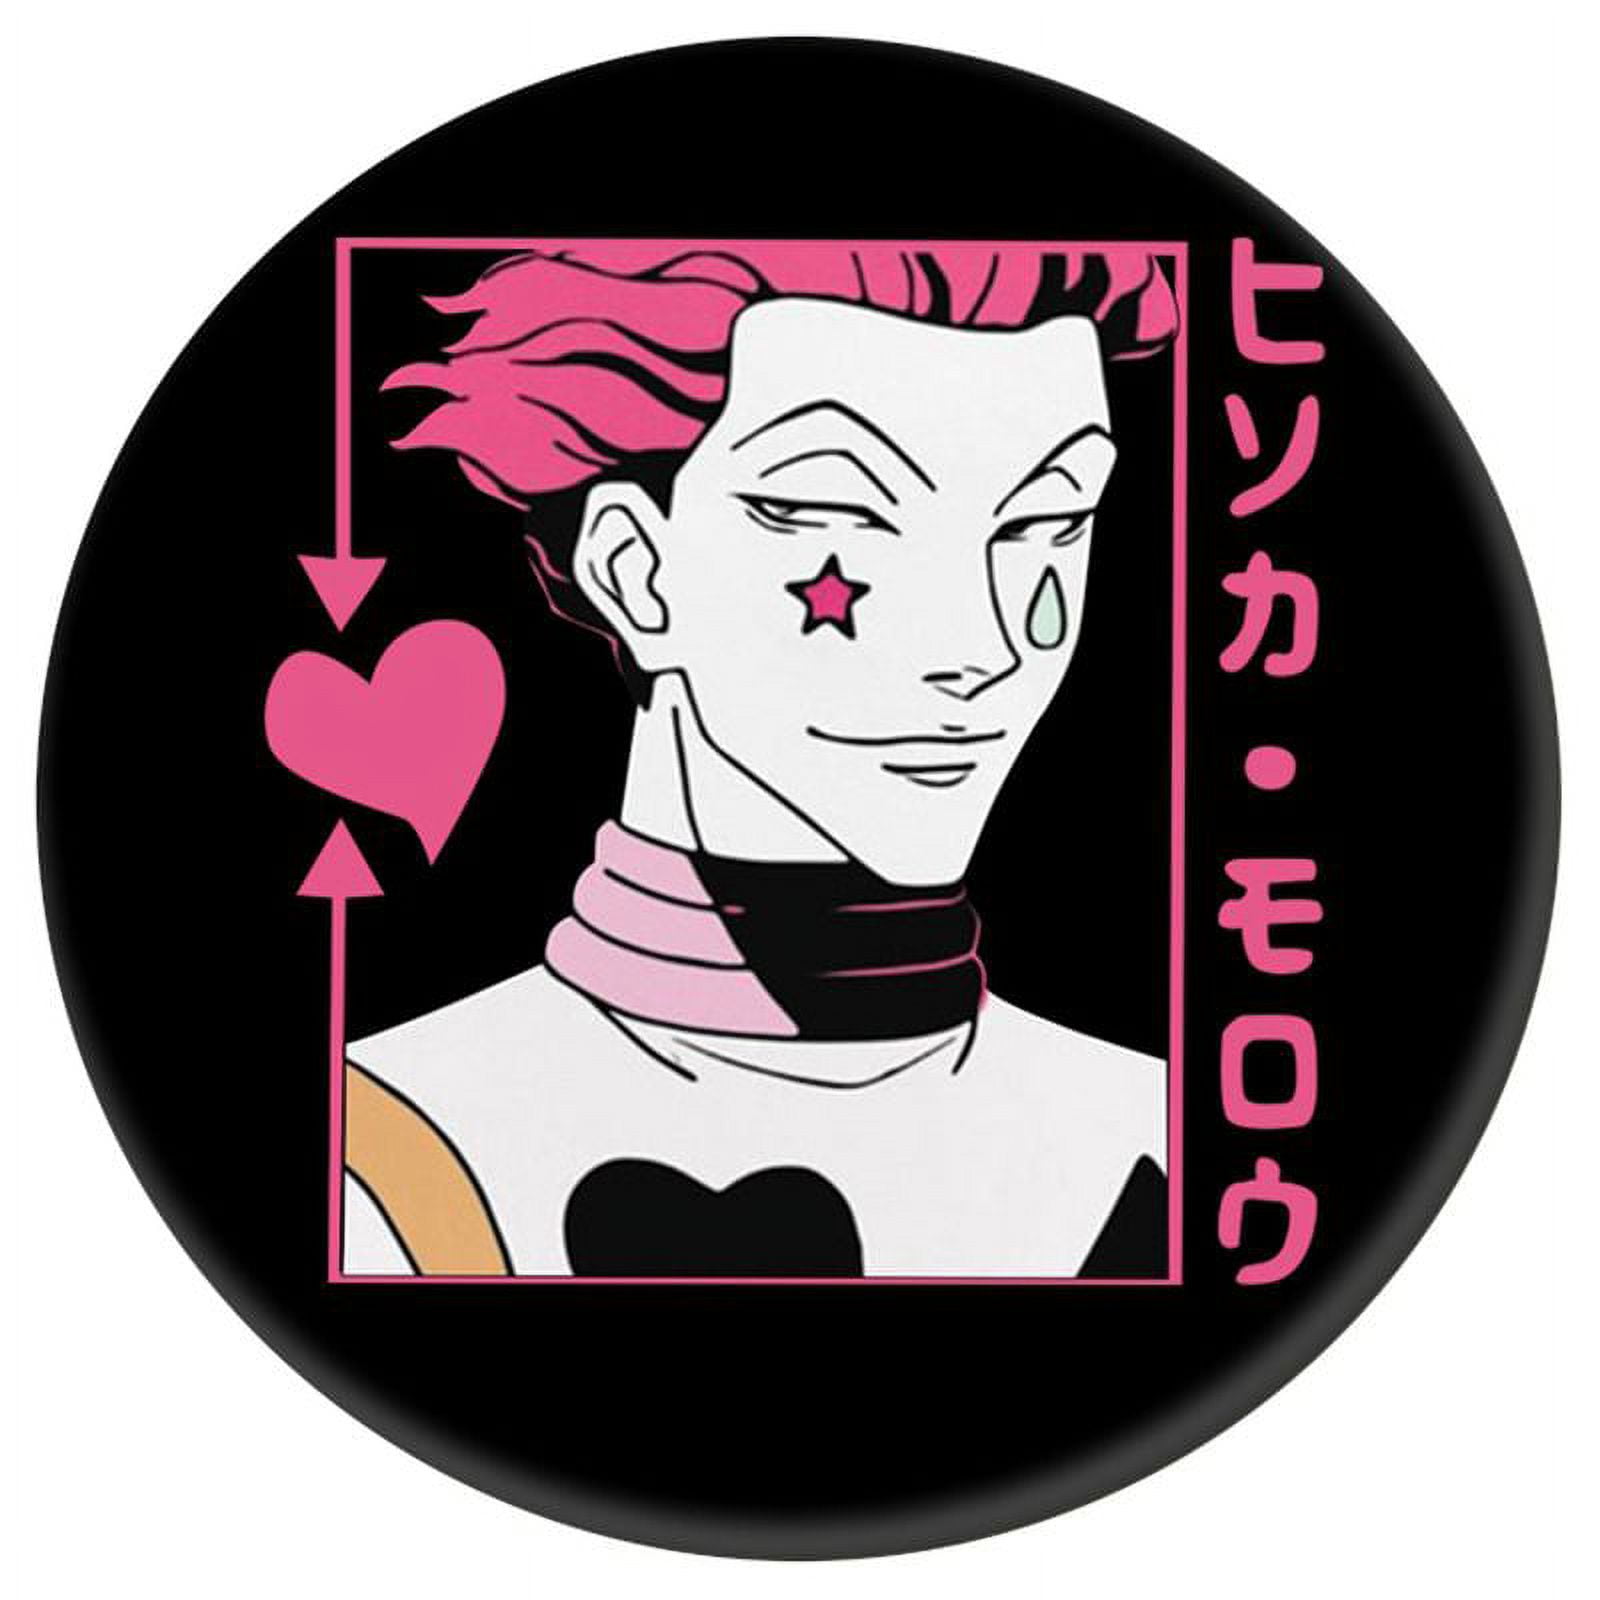 Hunter x Hunter Character Style Pins / Anime Buttons - CosplayFTW